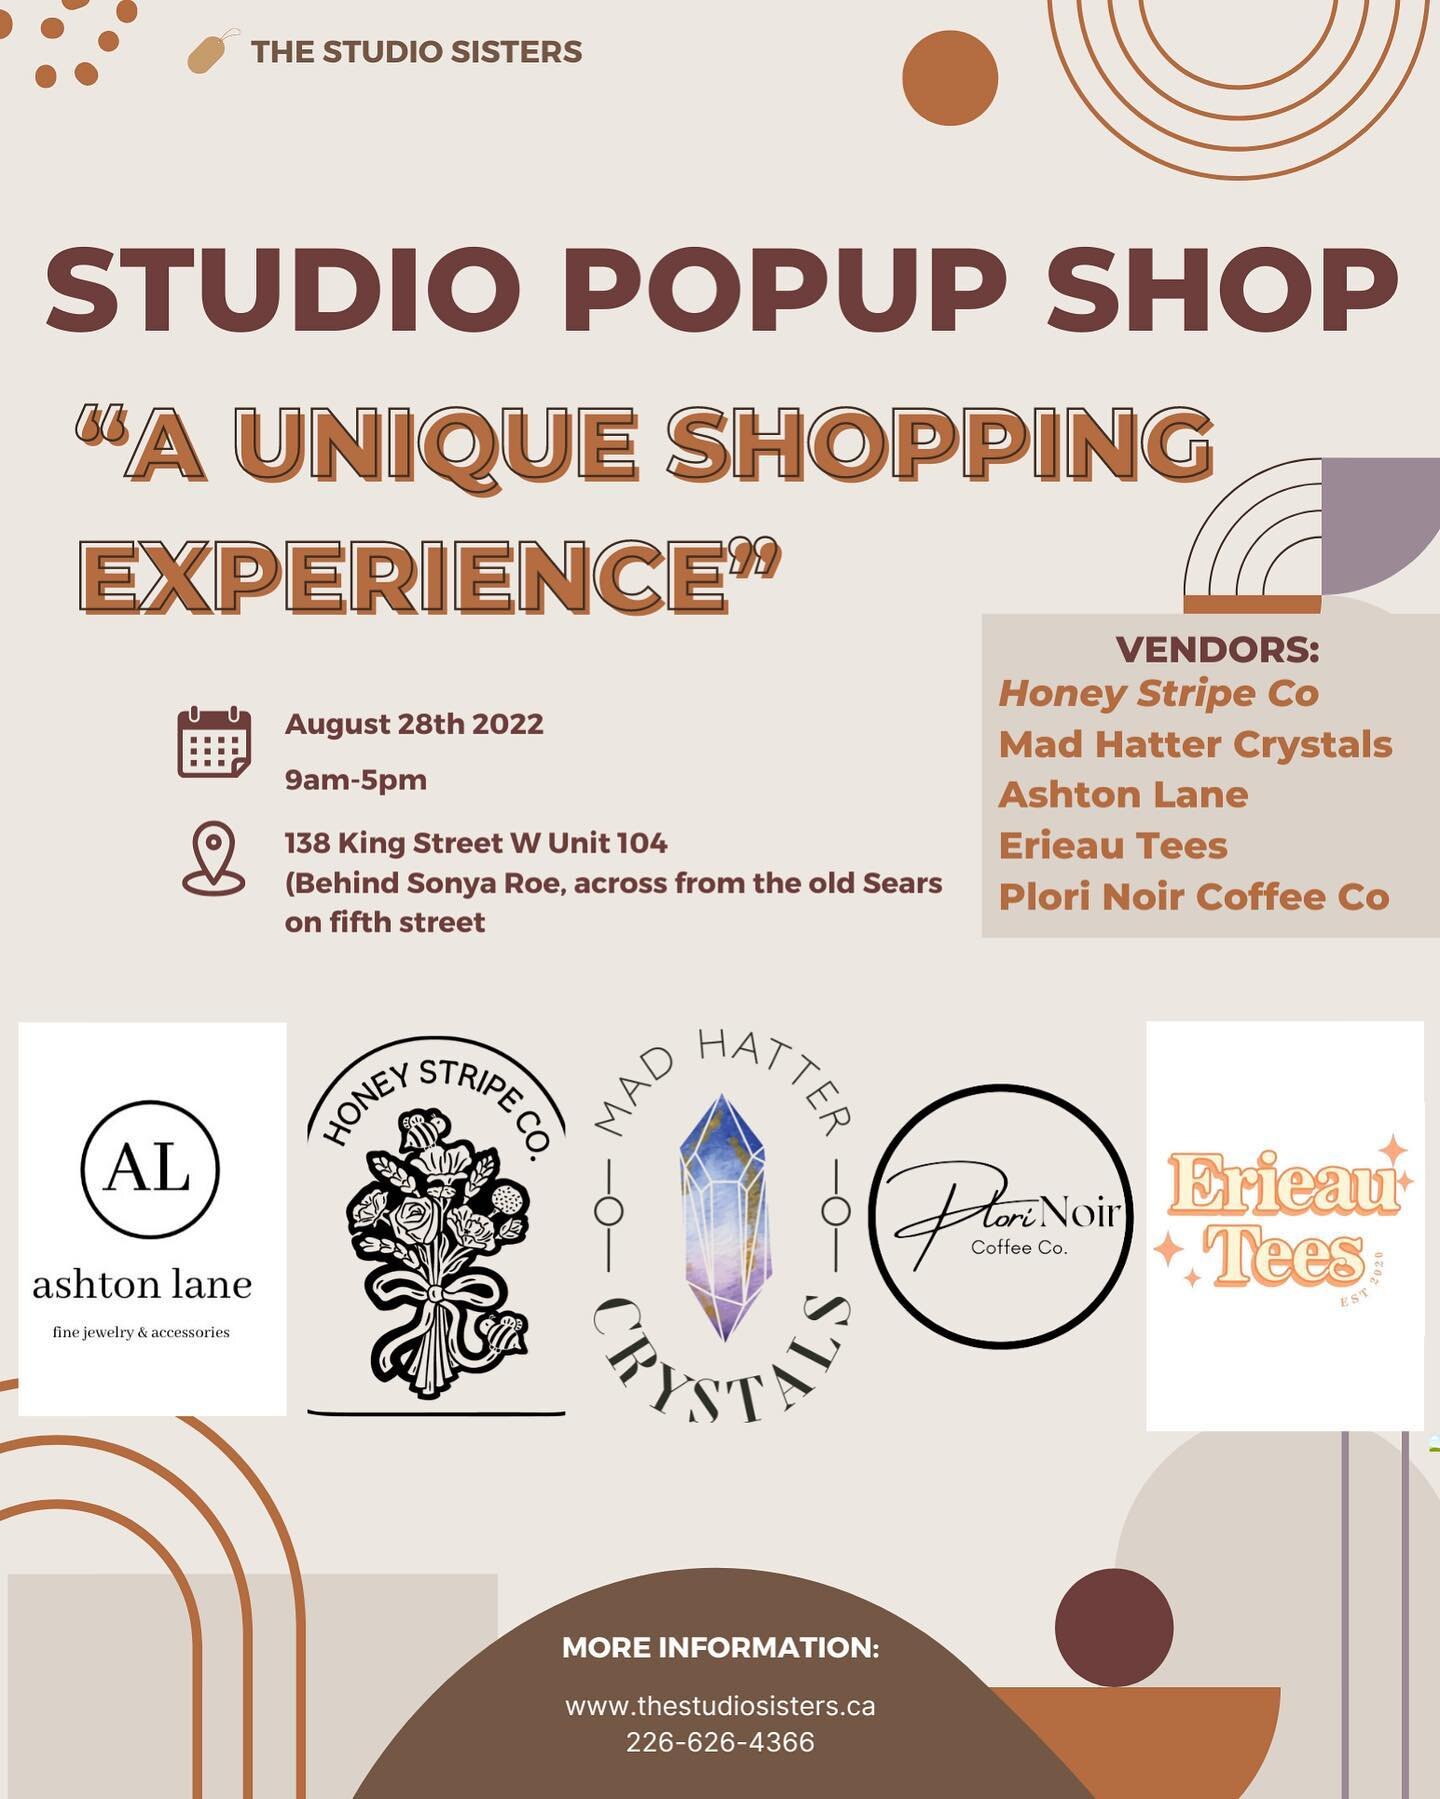 Come shopping at the studio for a unique studio shopping experience! 
We have some incredible brands joining us on August 28th from 9am-5pm 

@erieau_tees
@plori.noir 
@mad_hatter_crystals 
@ashton.laneco 
@honeystripeco 

Are all going to be filling